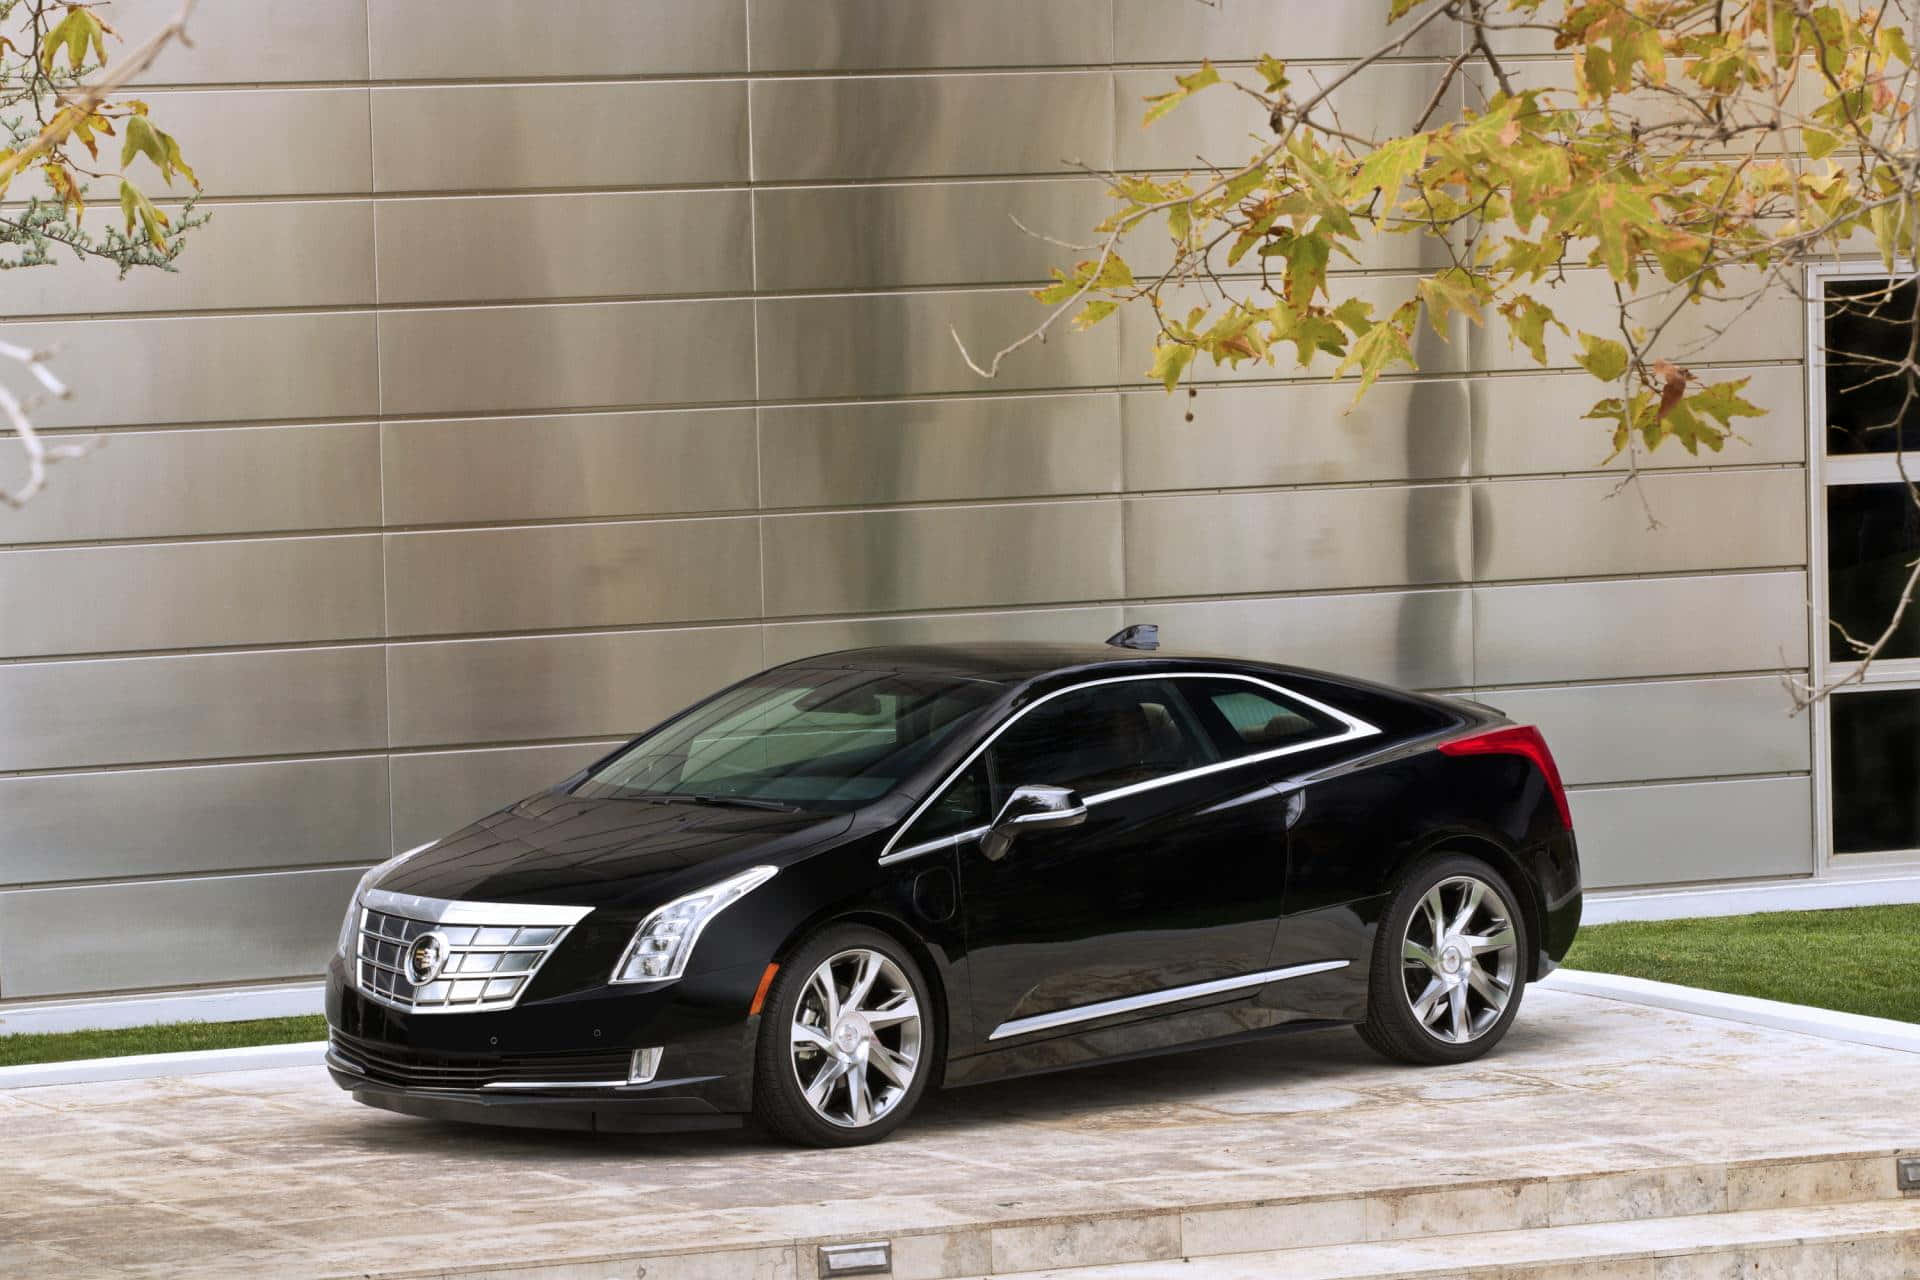 Stunning Cadillac ELR in HDR Wallpaper